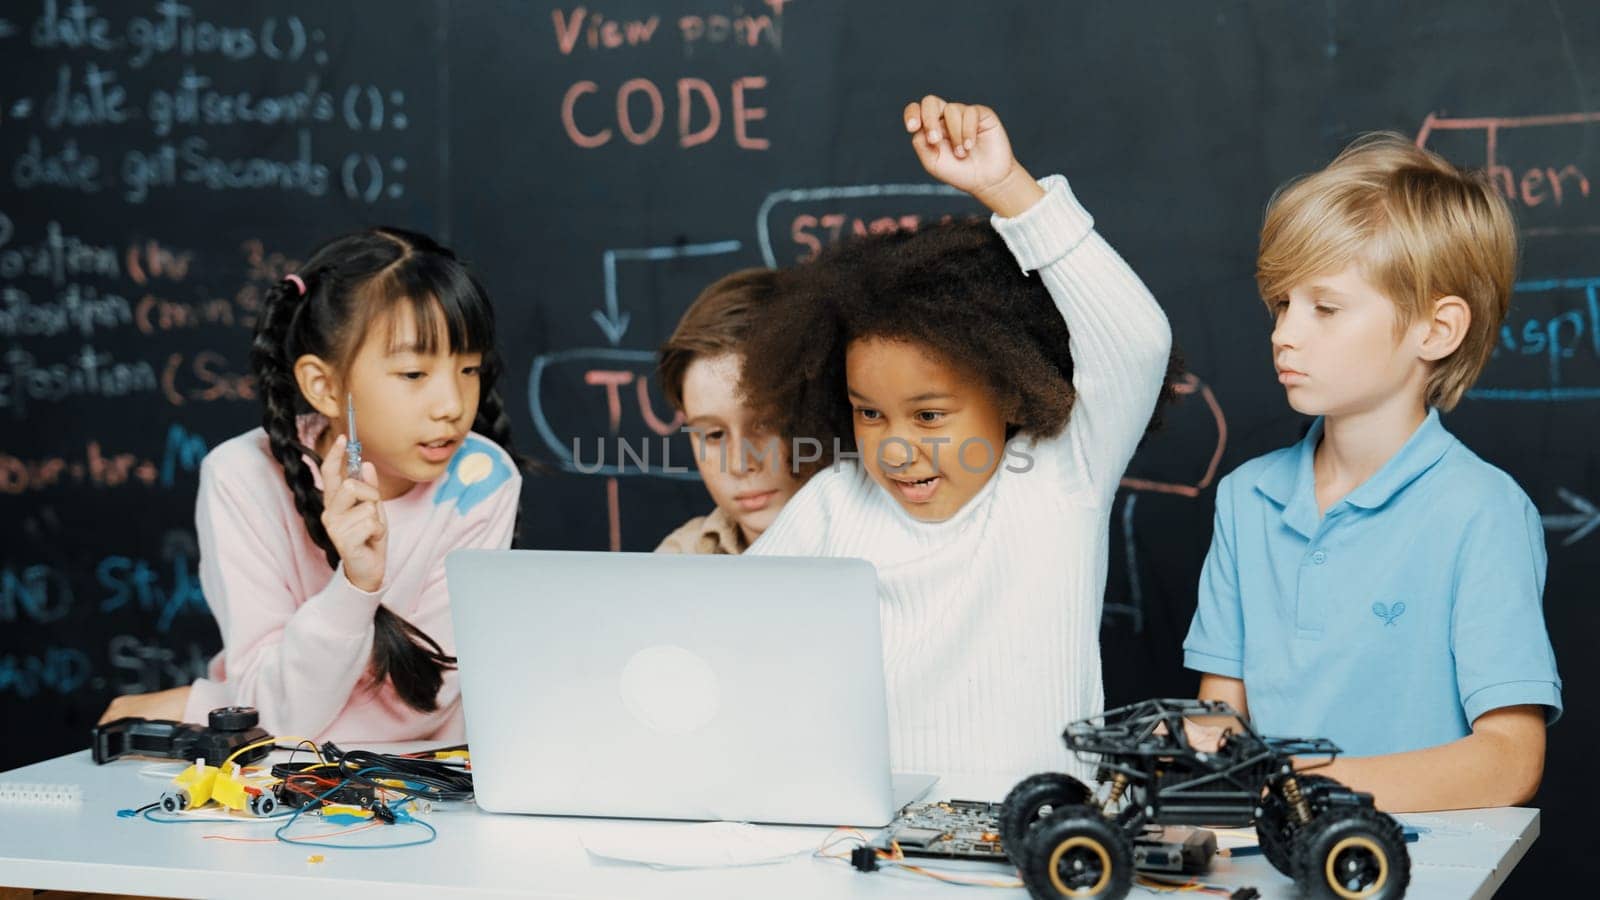 Multicultural smart children using laptop programing engineering code and writing or coding program in STEM technology classroom at blackboard written prompt. African girl raised hand. Erudition.